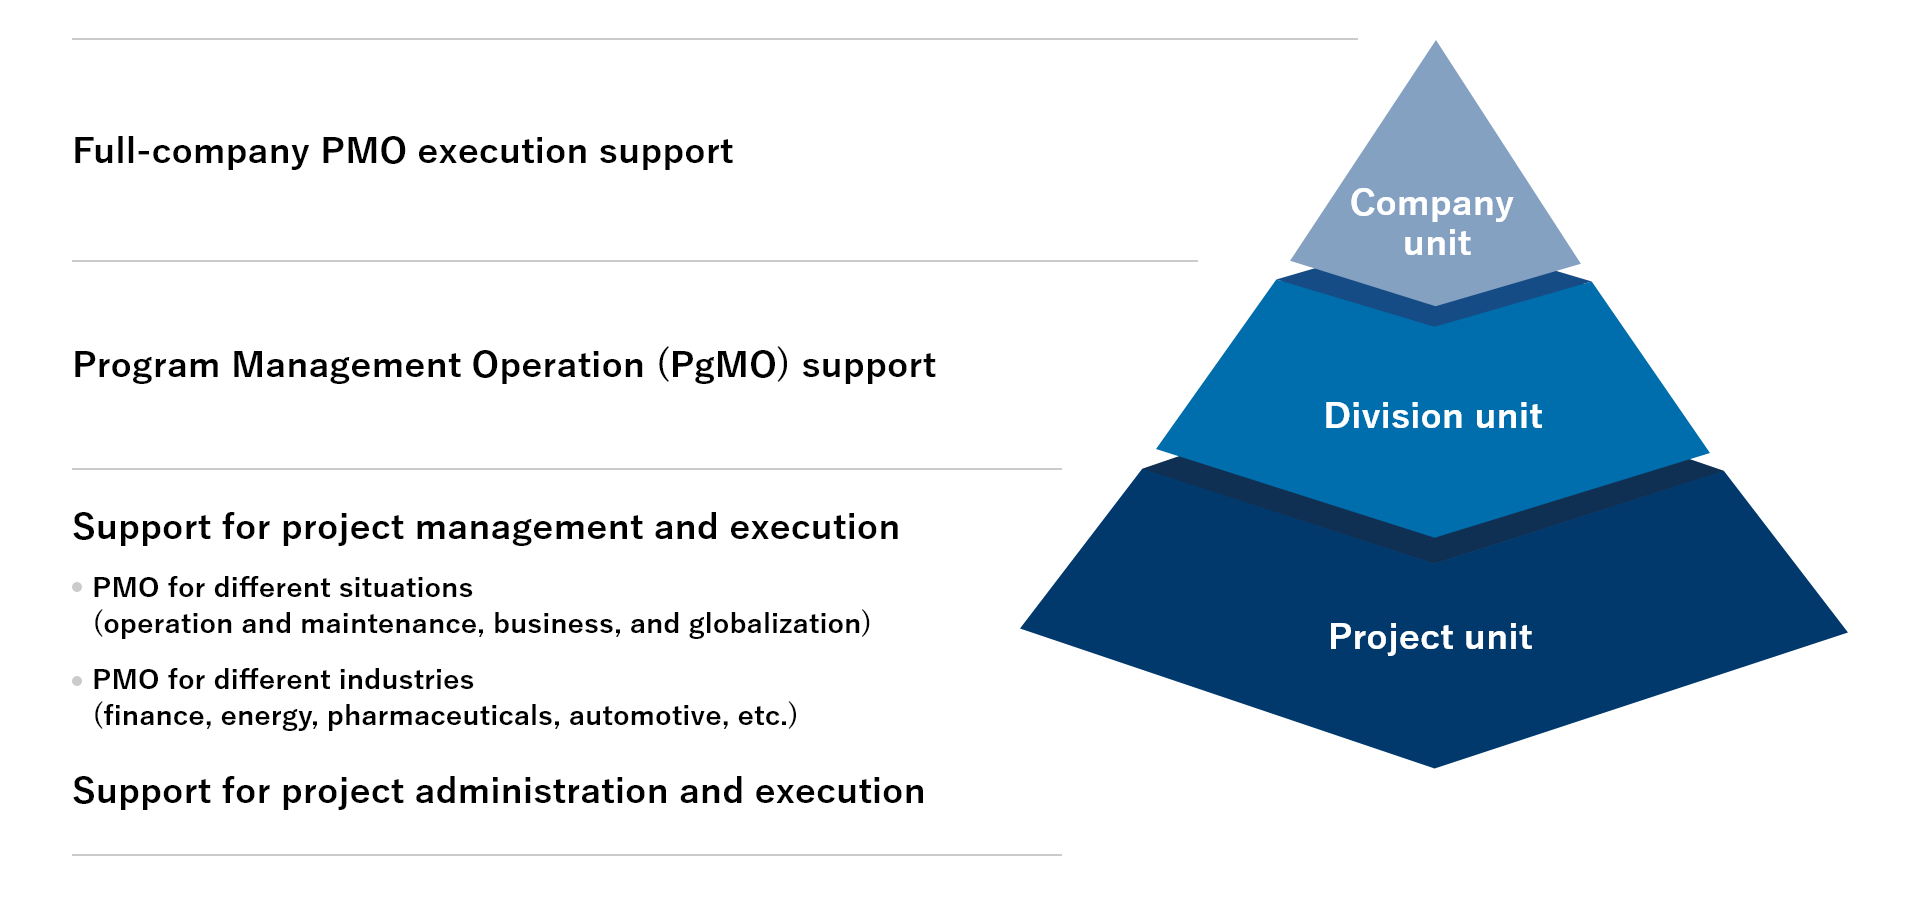 Image explaining PMO execution support for each layer